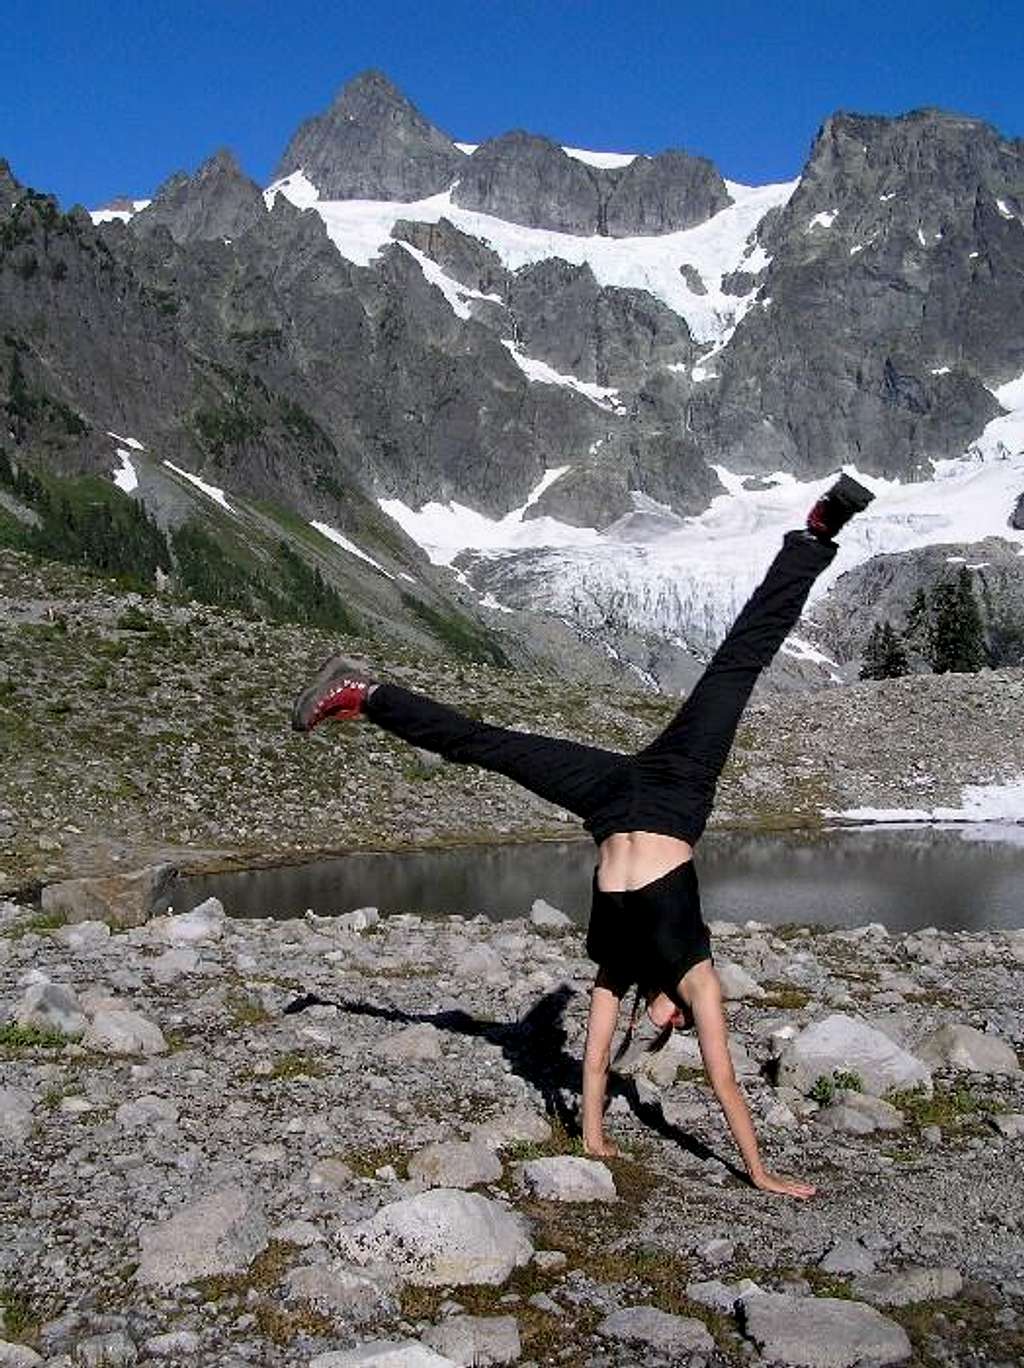 No room for a cartwheel on the summit